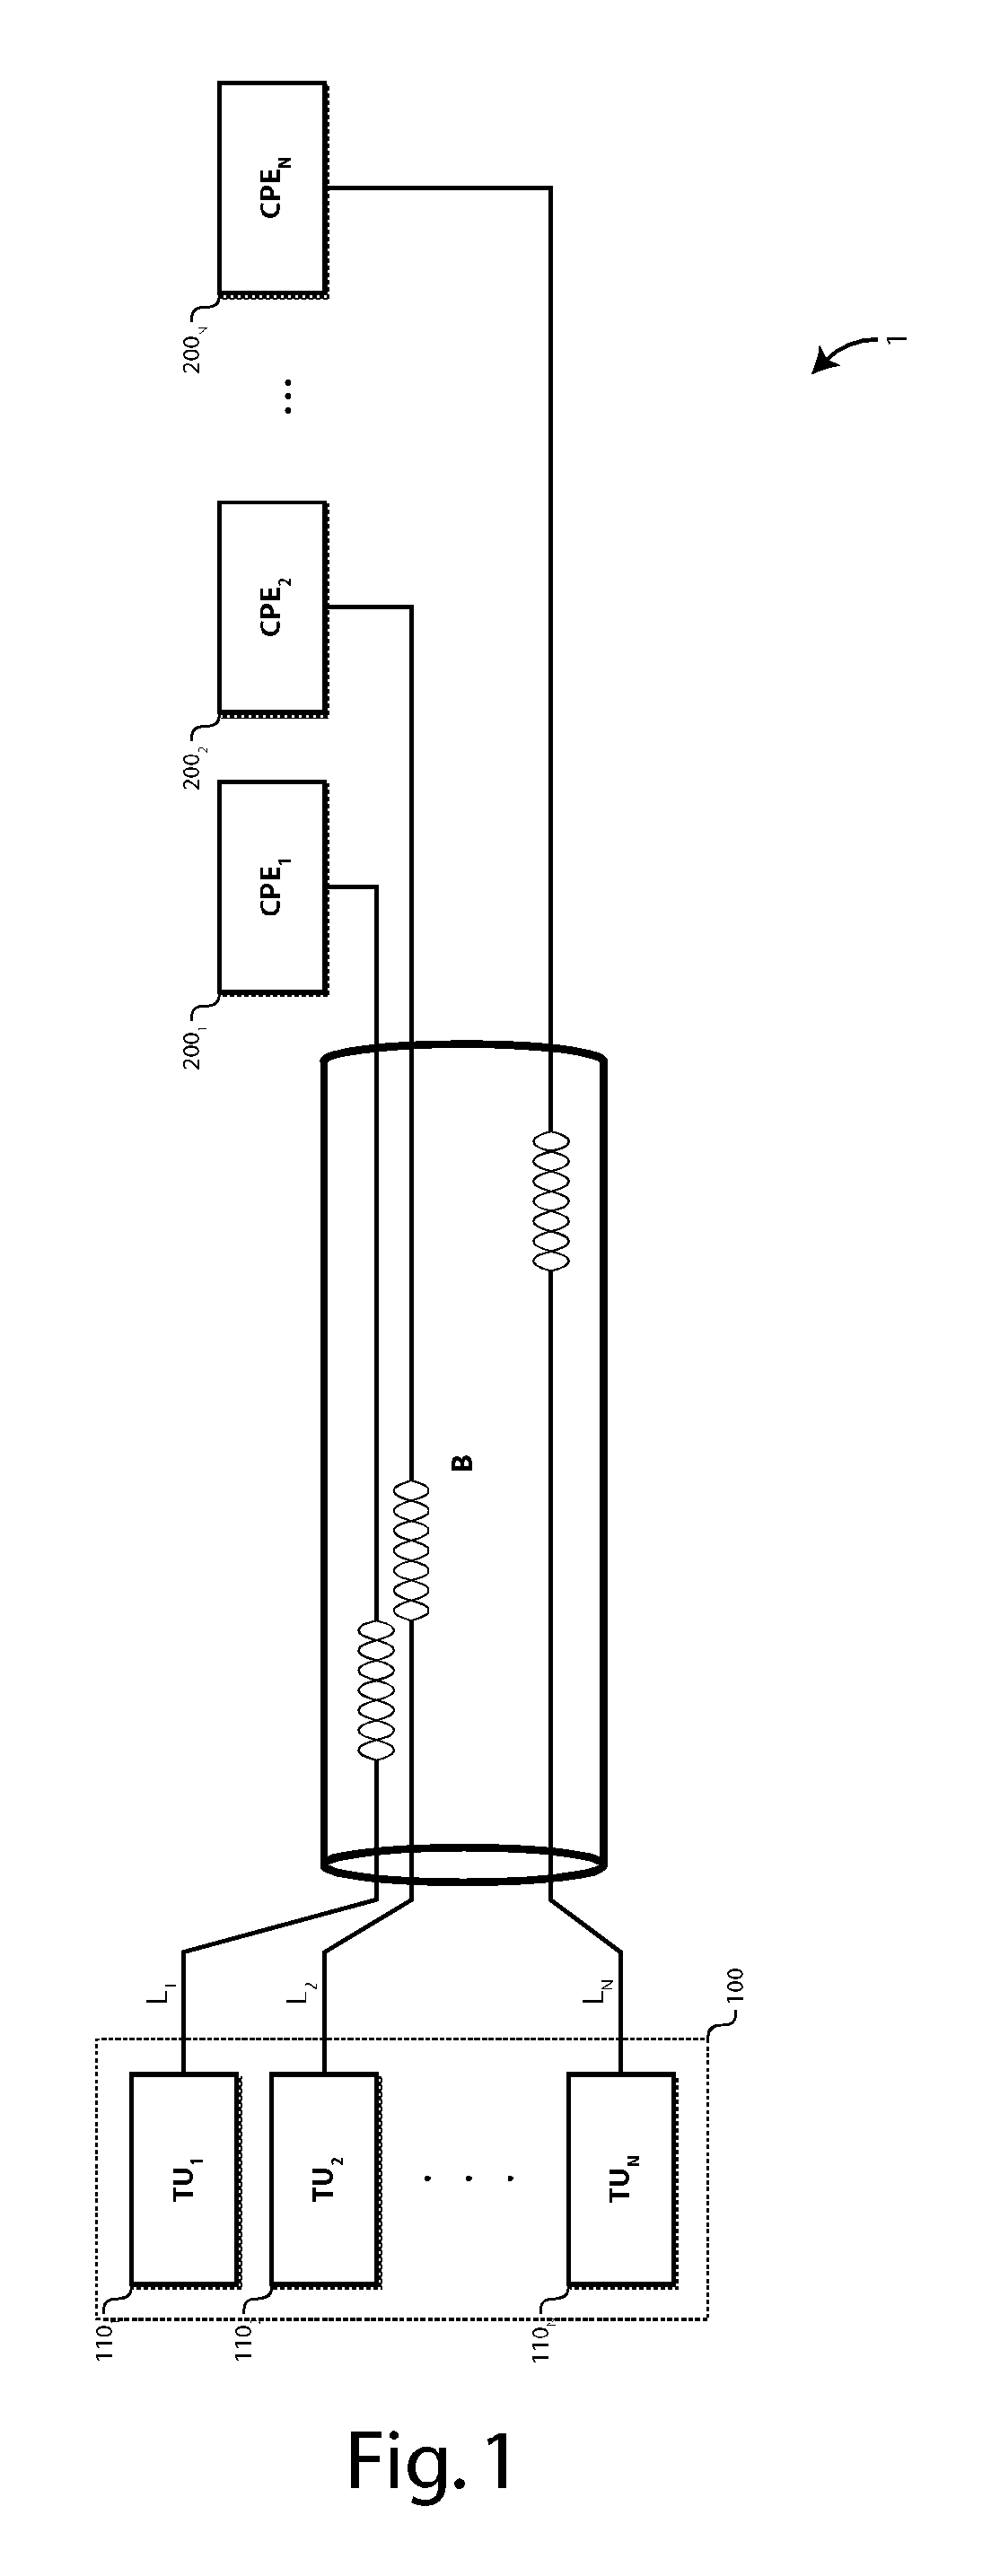 Method and apparatus for fast and accurate acquisition of crosstalk coefficients